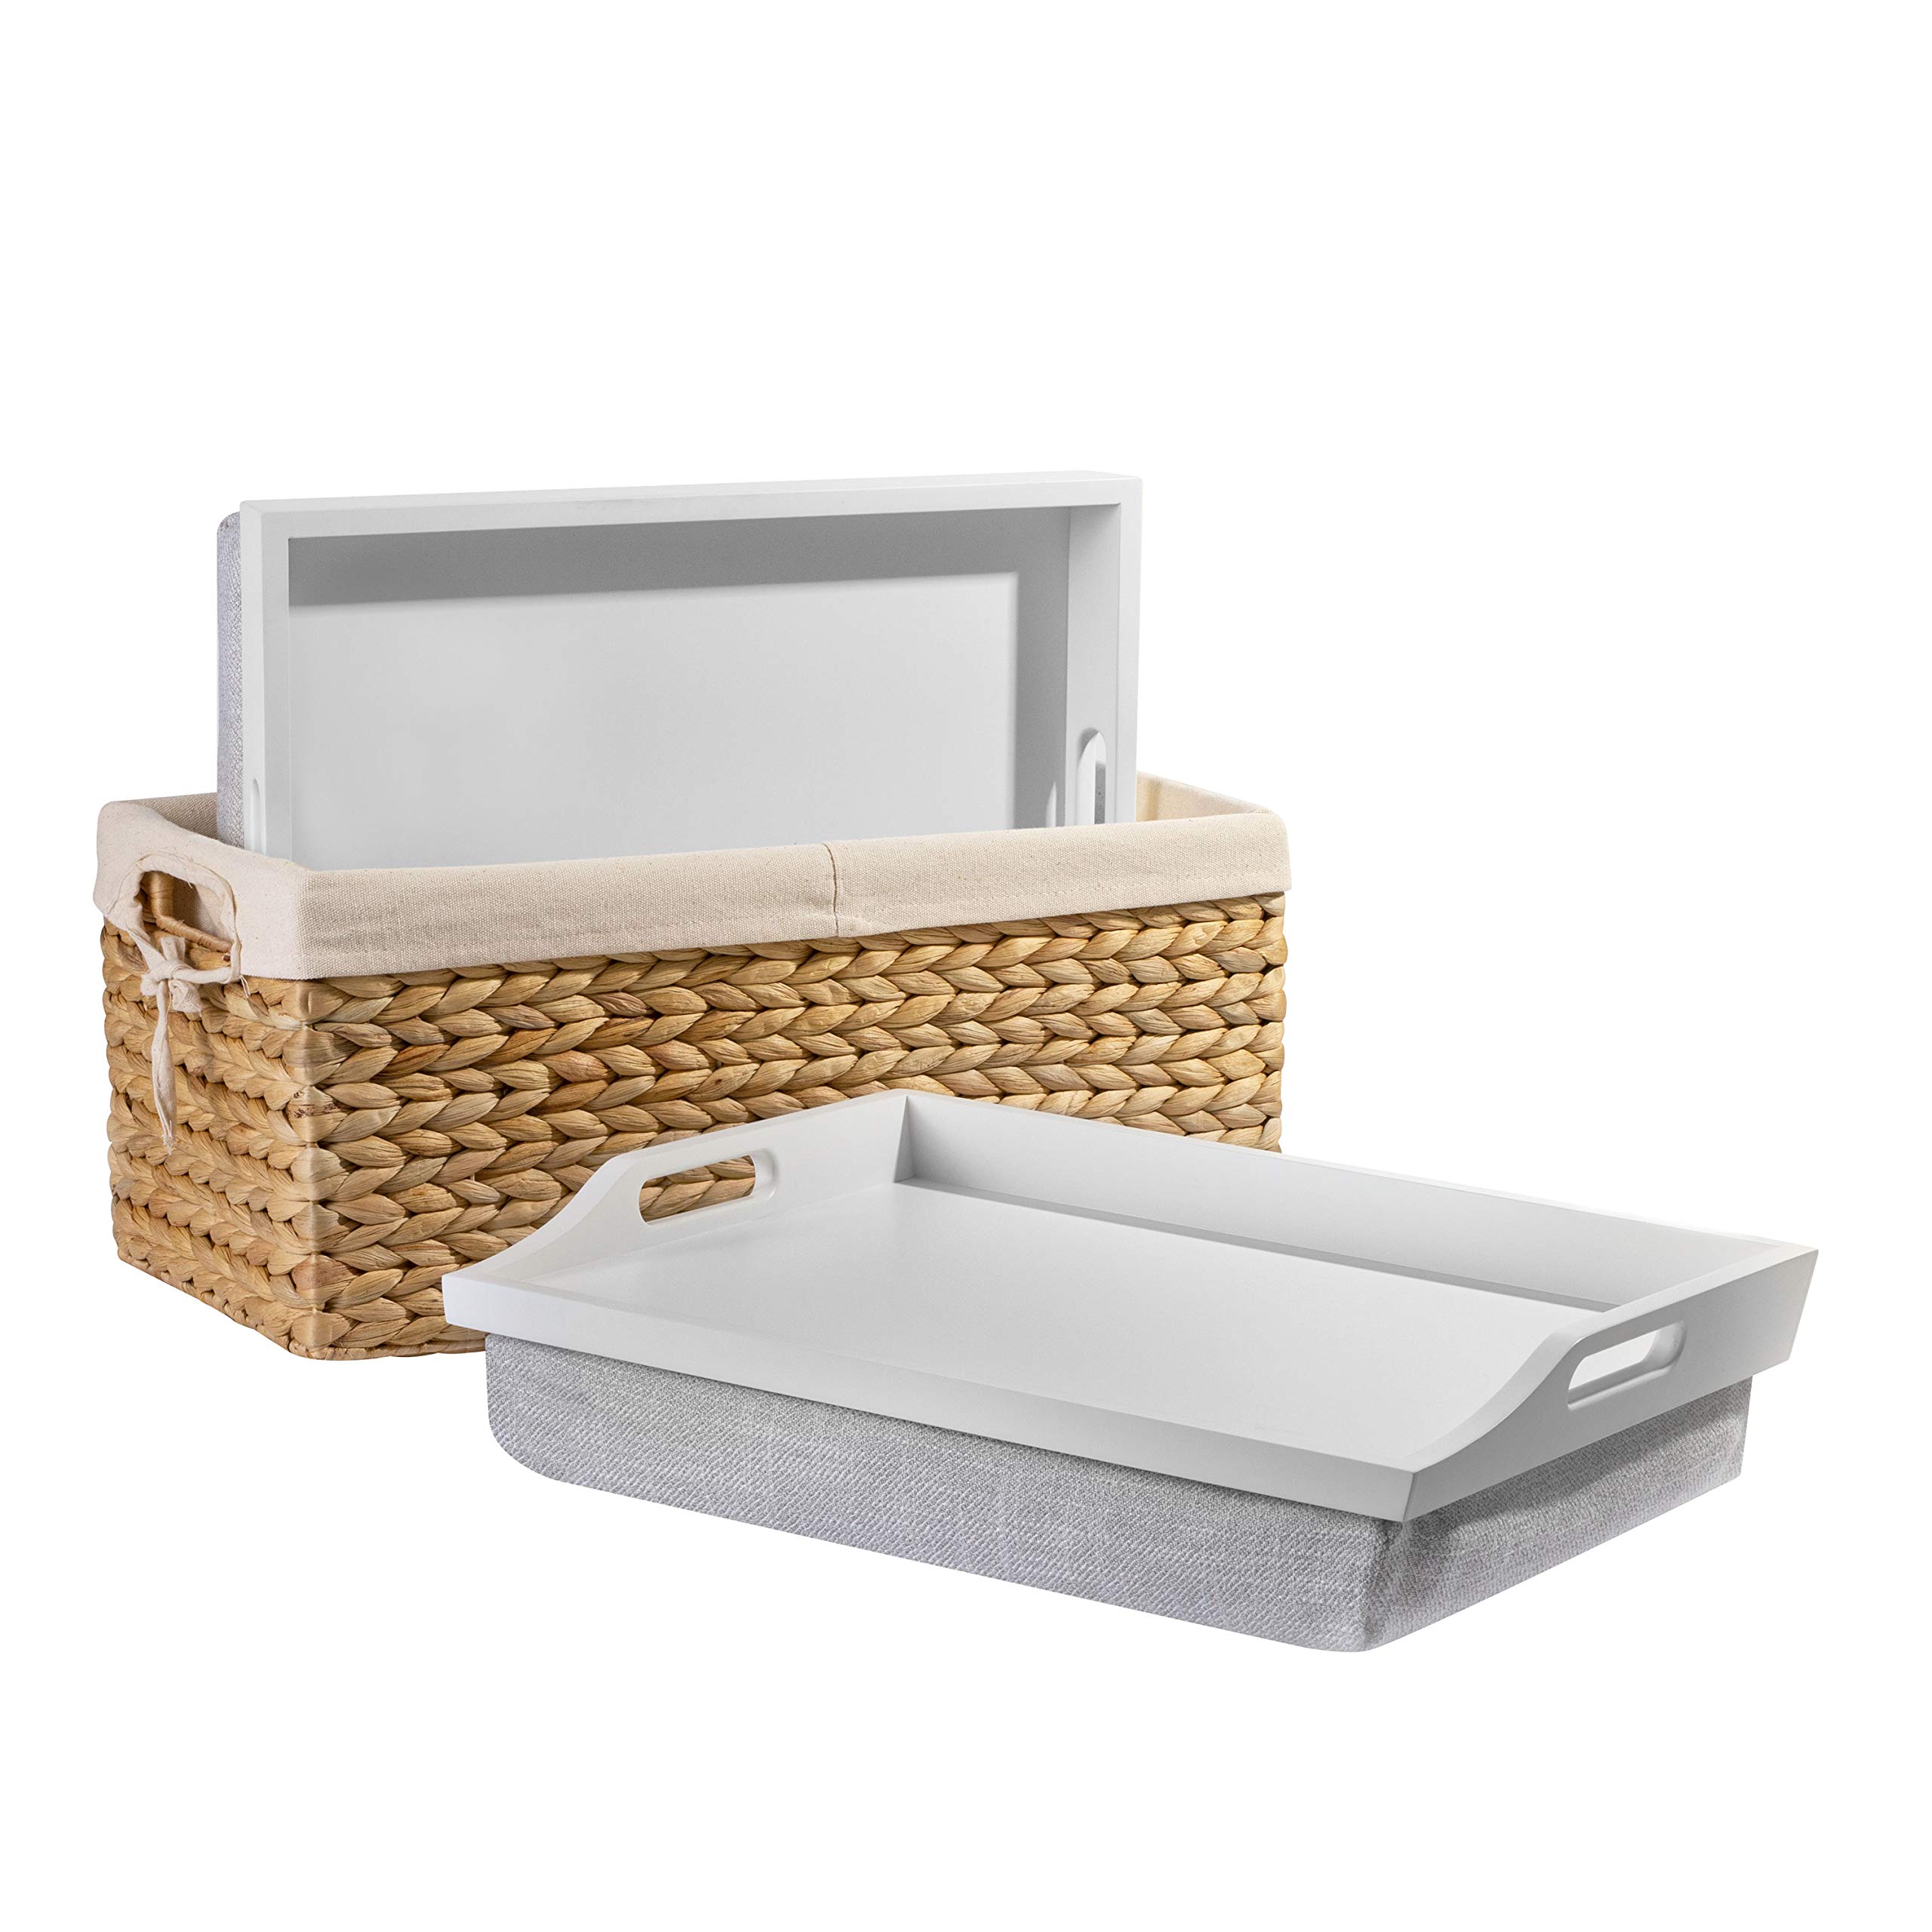 Rossie Home Wood Bed Tray Lap Desk - Set of Two - with Hyacinth Storage Basket - Soft White - Fits up to 156 Inch Laptops - Styl